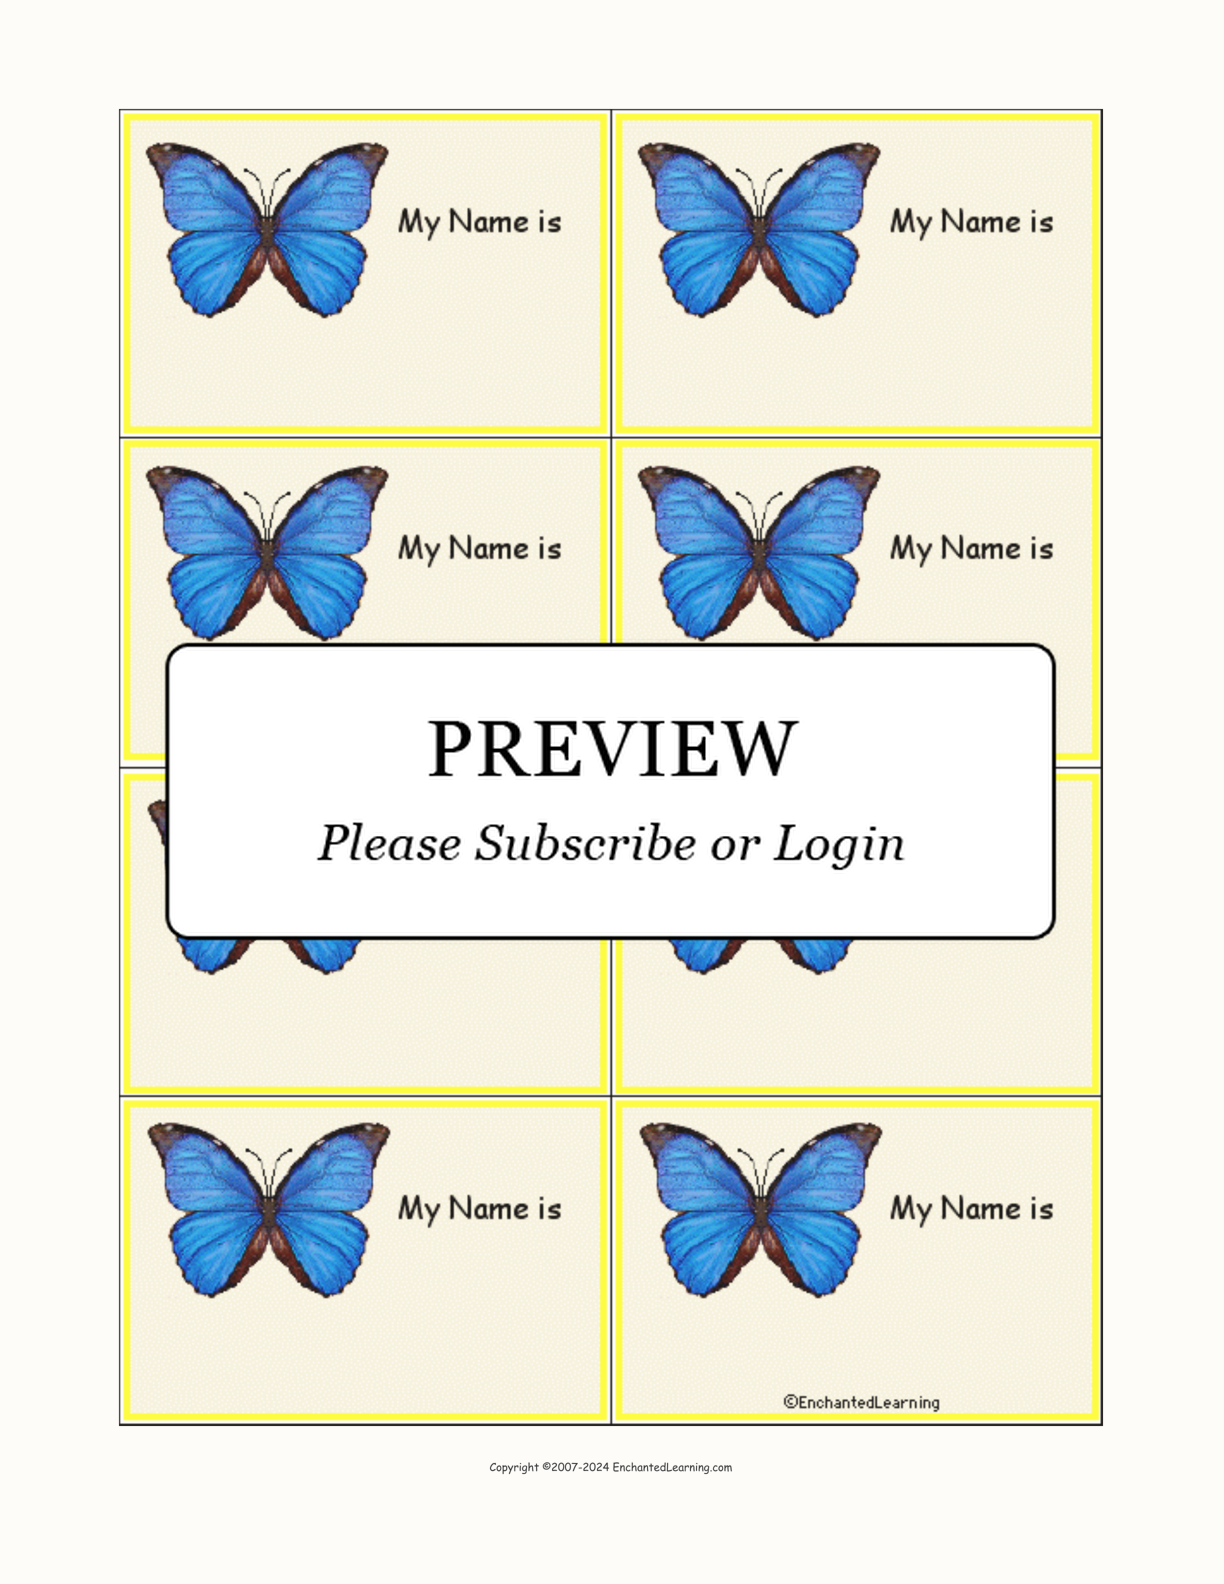 Morpho Butterfly Nametags interactive printout page 1